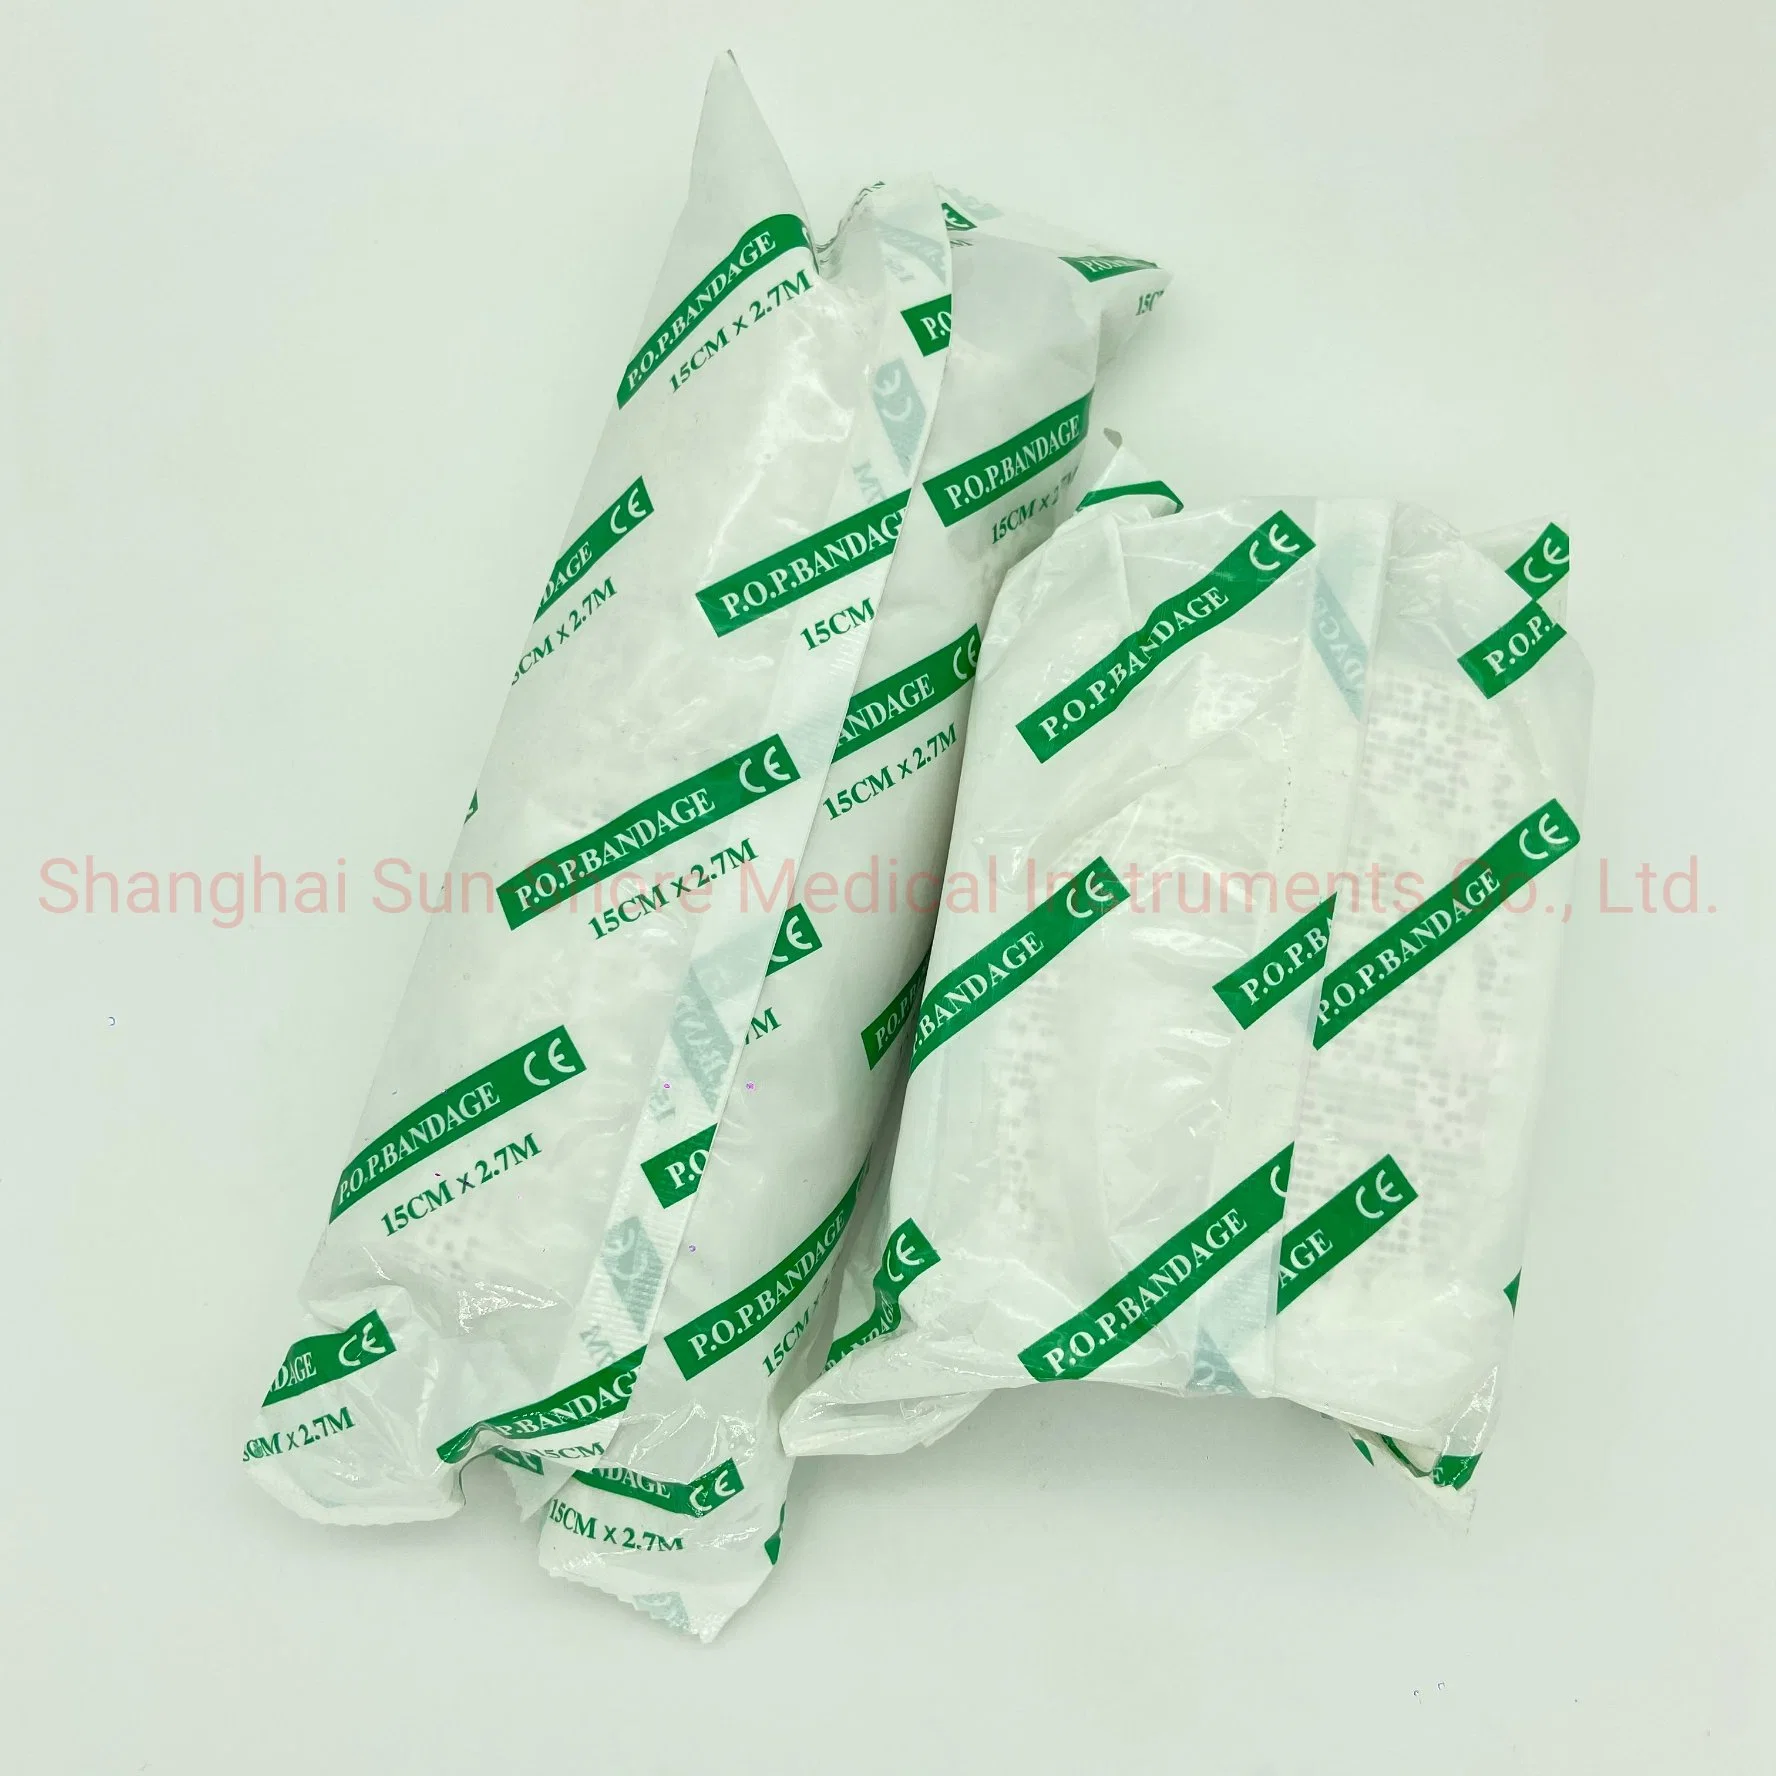 China Wholesale/Supplier OEM Medical High quality/High cost performance  Gypsum Liner (POP) Plaster of Paris Bandage Factory Approved by CE and ISO CE FDA